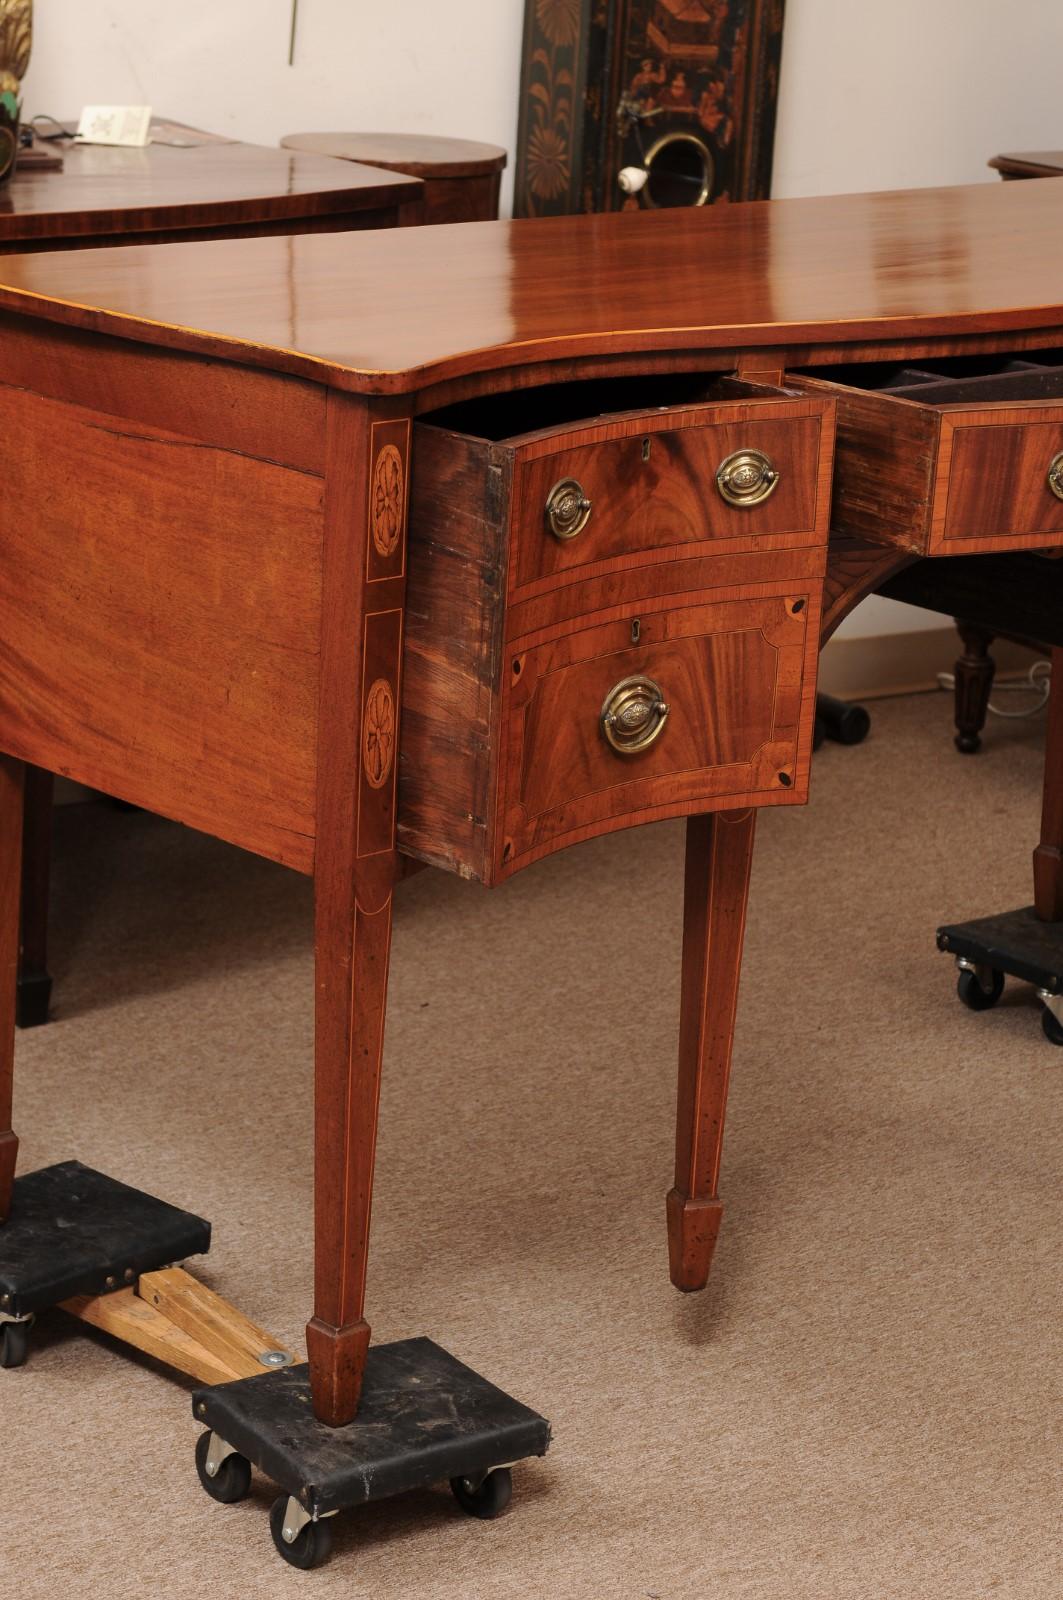 18th Century and Earlier 18th Century English Hepplewhite Sideboard in Inlaid Satinwood with Spade Feet For Sale